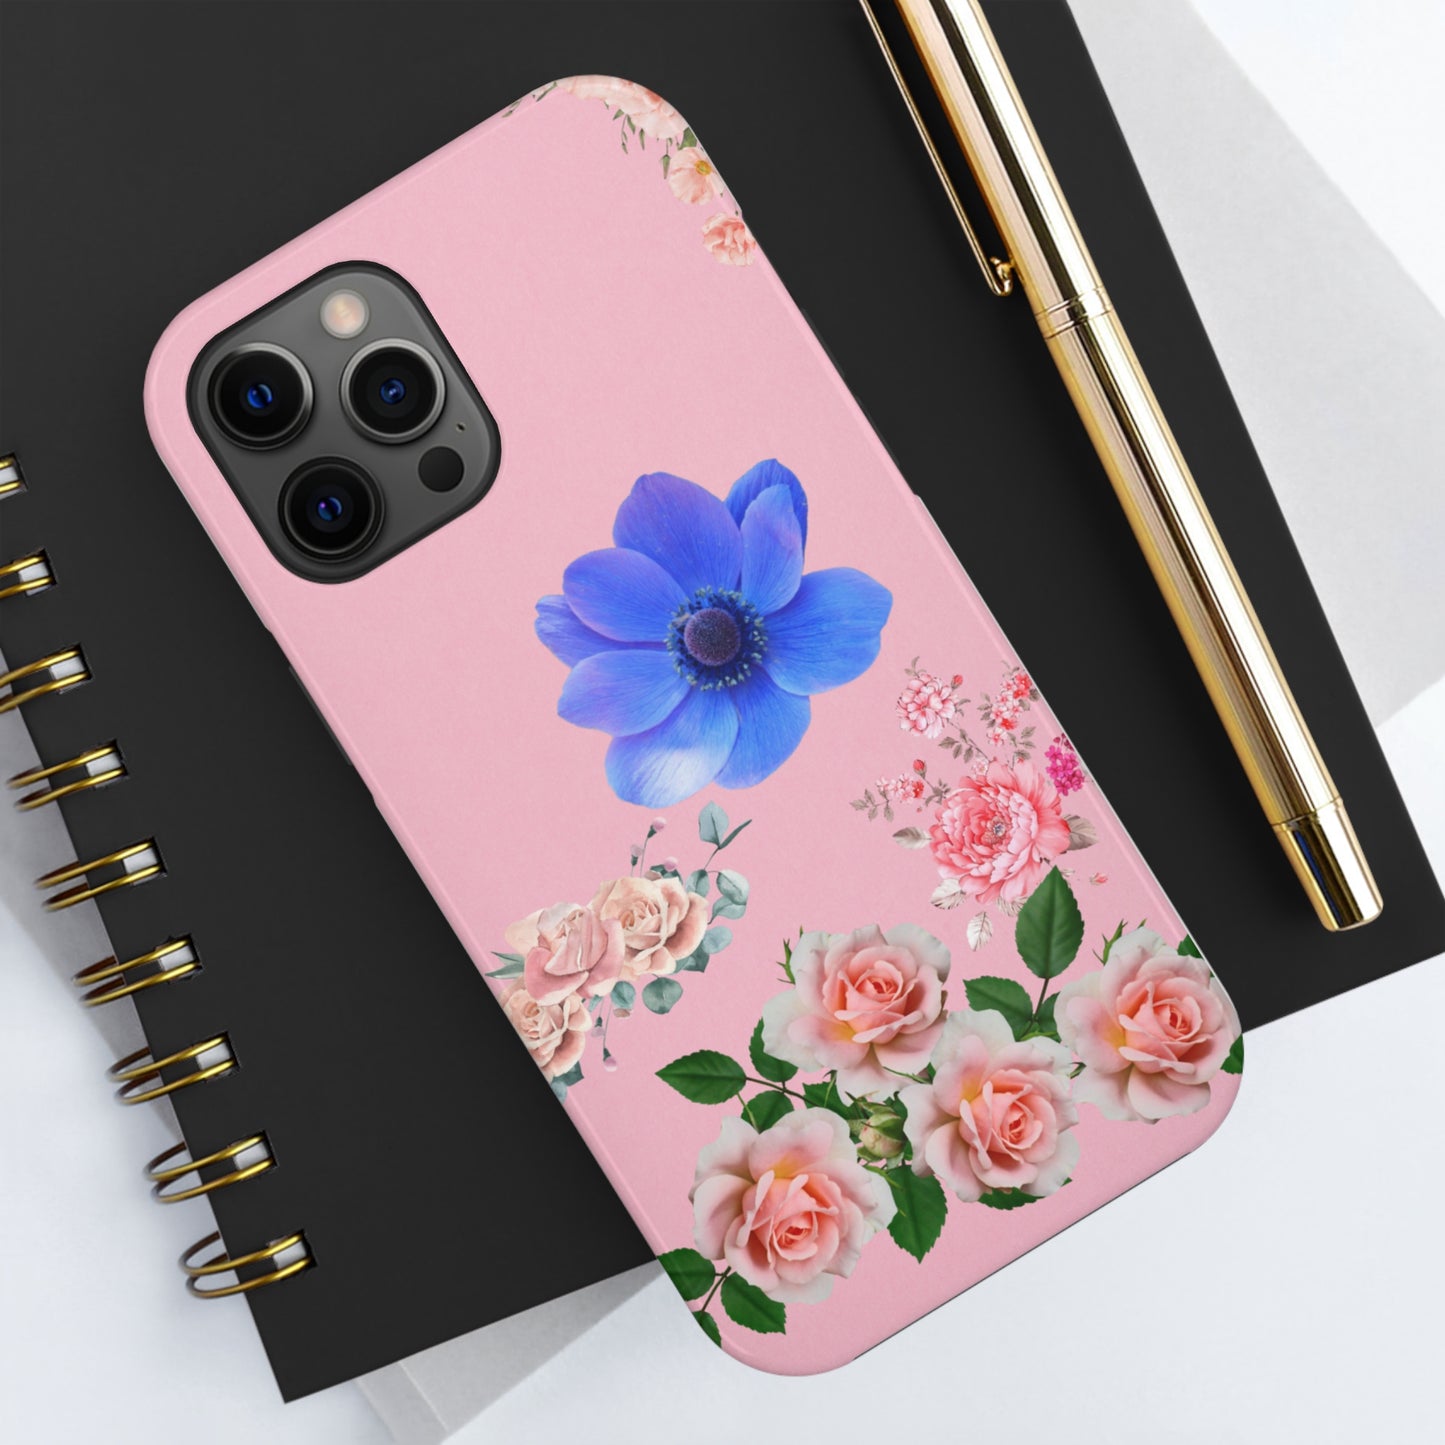 Your iPhone, your canvas: custom made cases,Make your iPhone shine